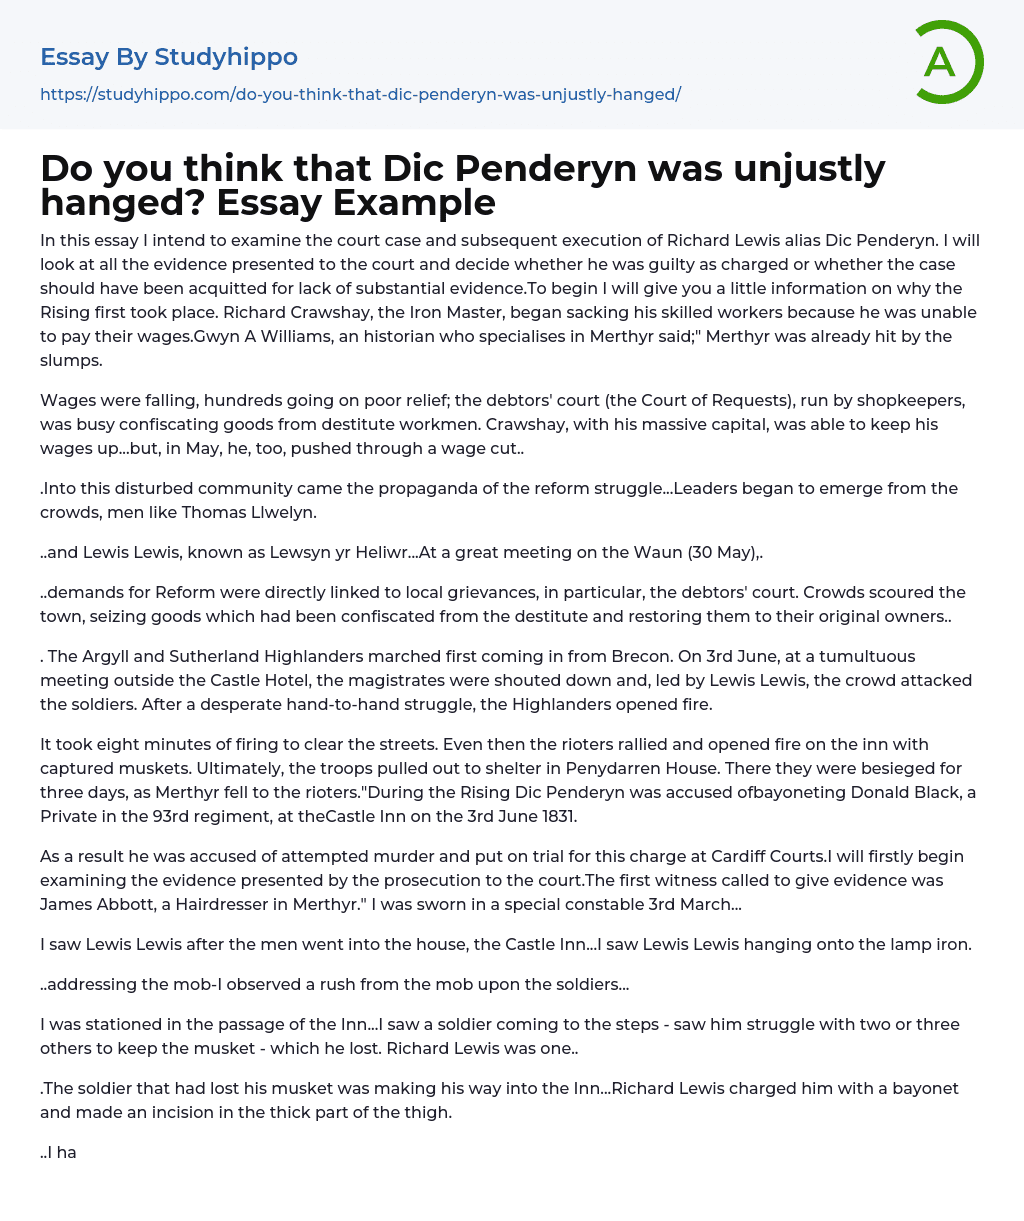 Do you think that Dic Penderyn was unjustly hanged? Essay Example